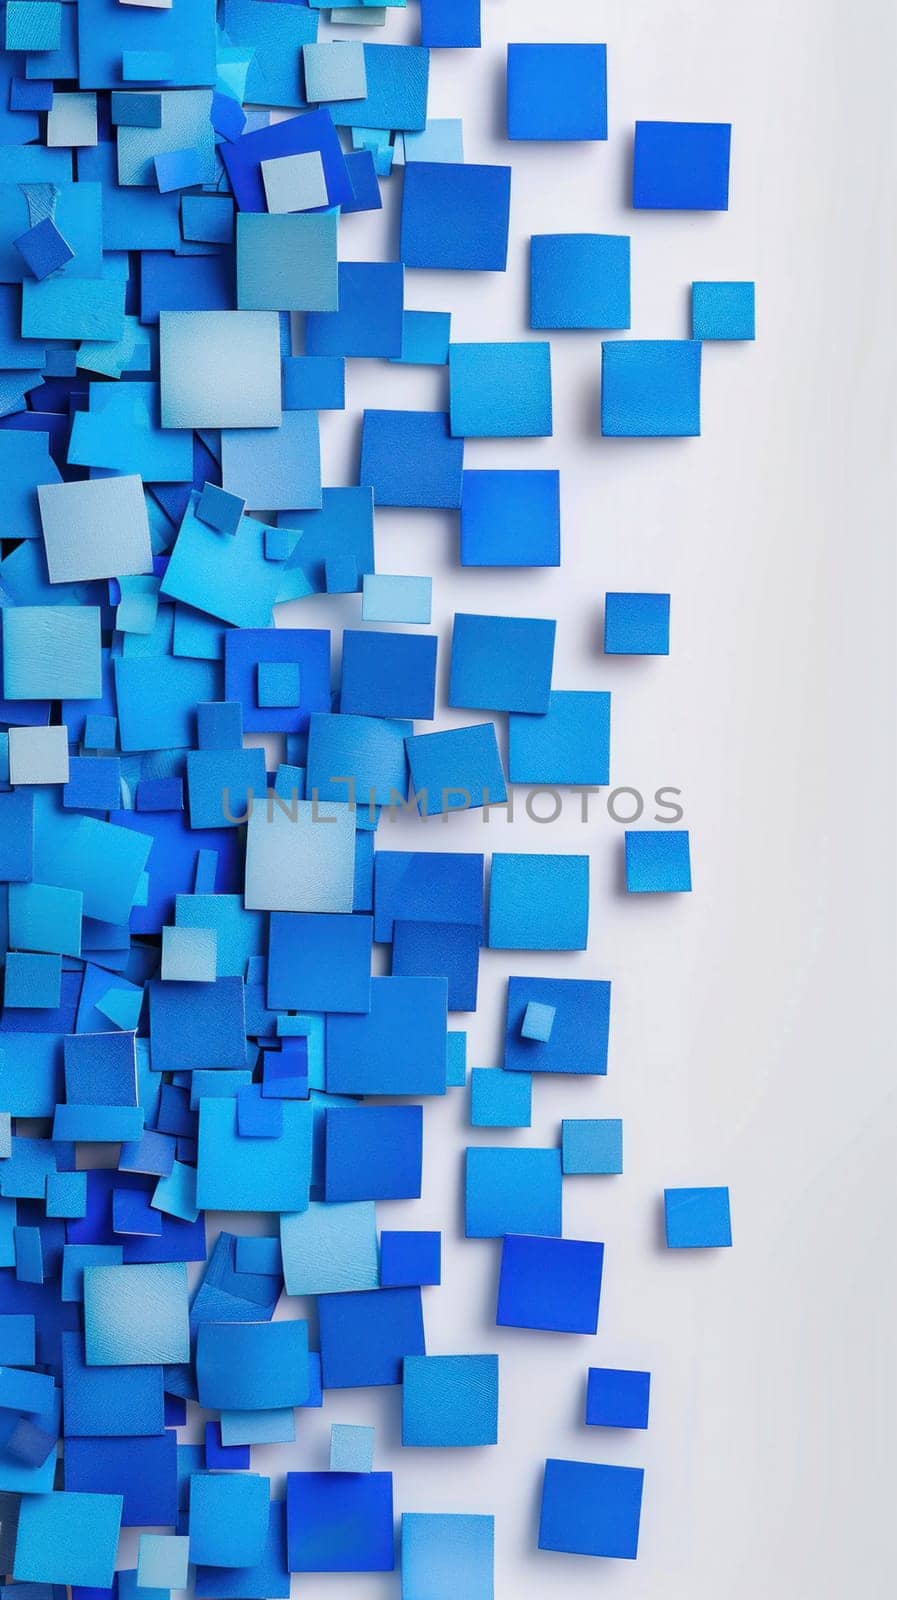 A creative presentation of blue squares on a white background, showcasing artistry and balance in design